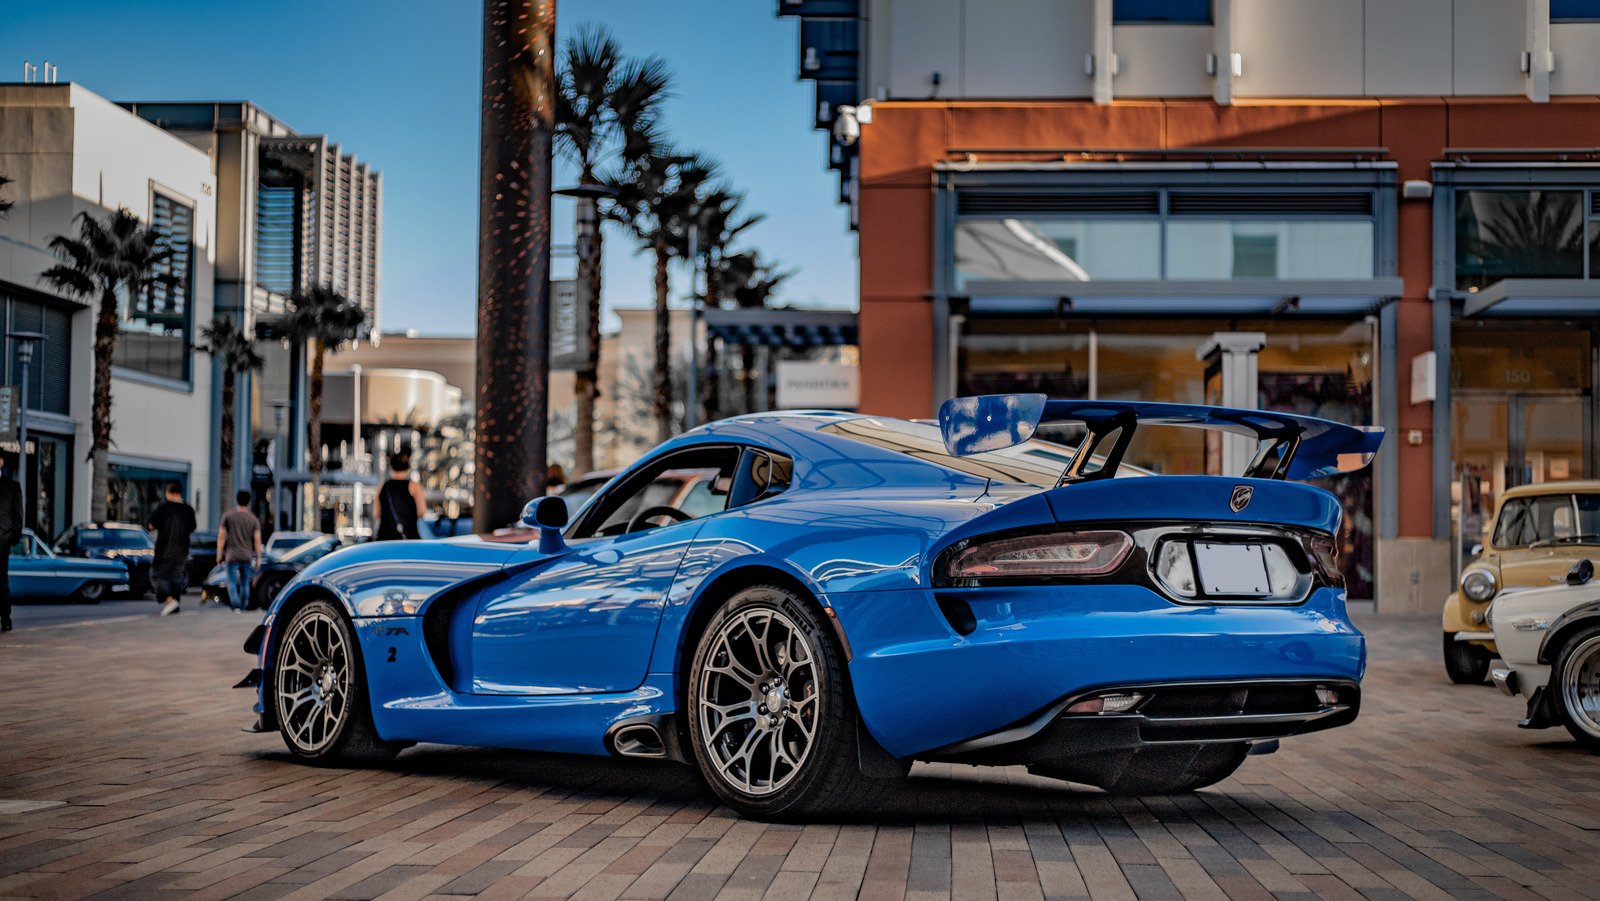 The Reason Why The Dodge Viper Was Discontinued